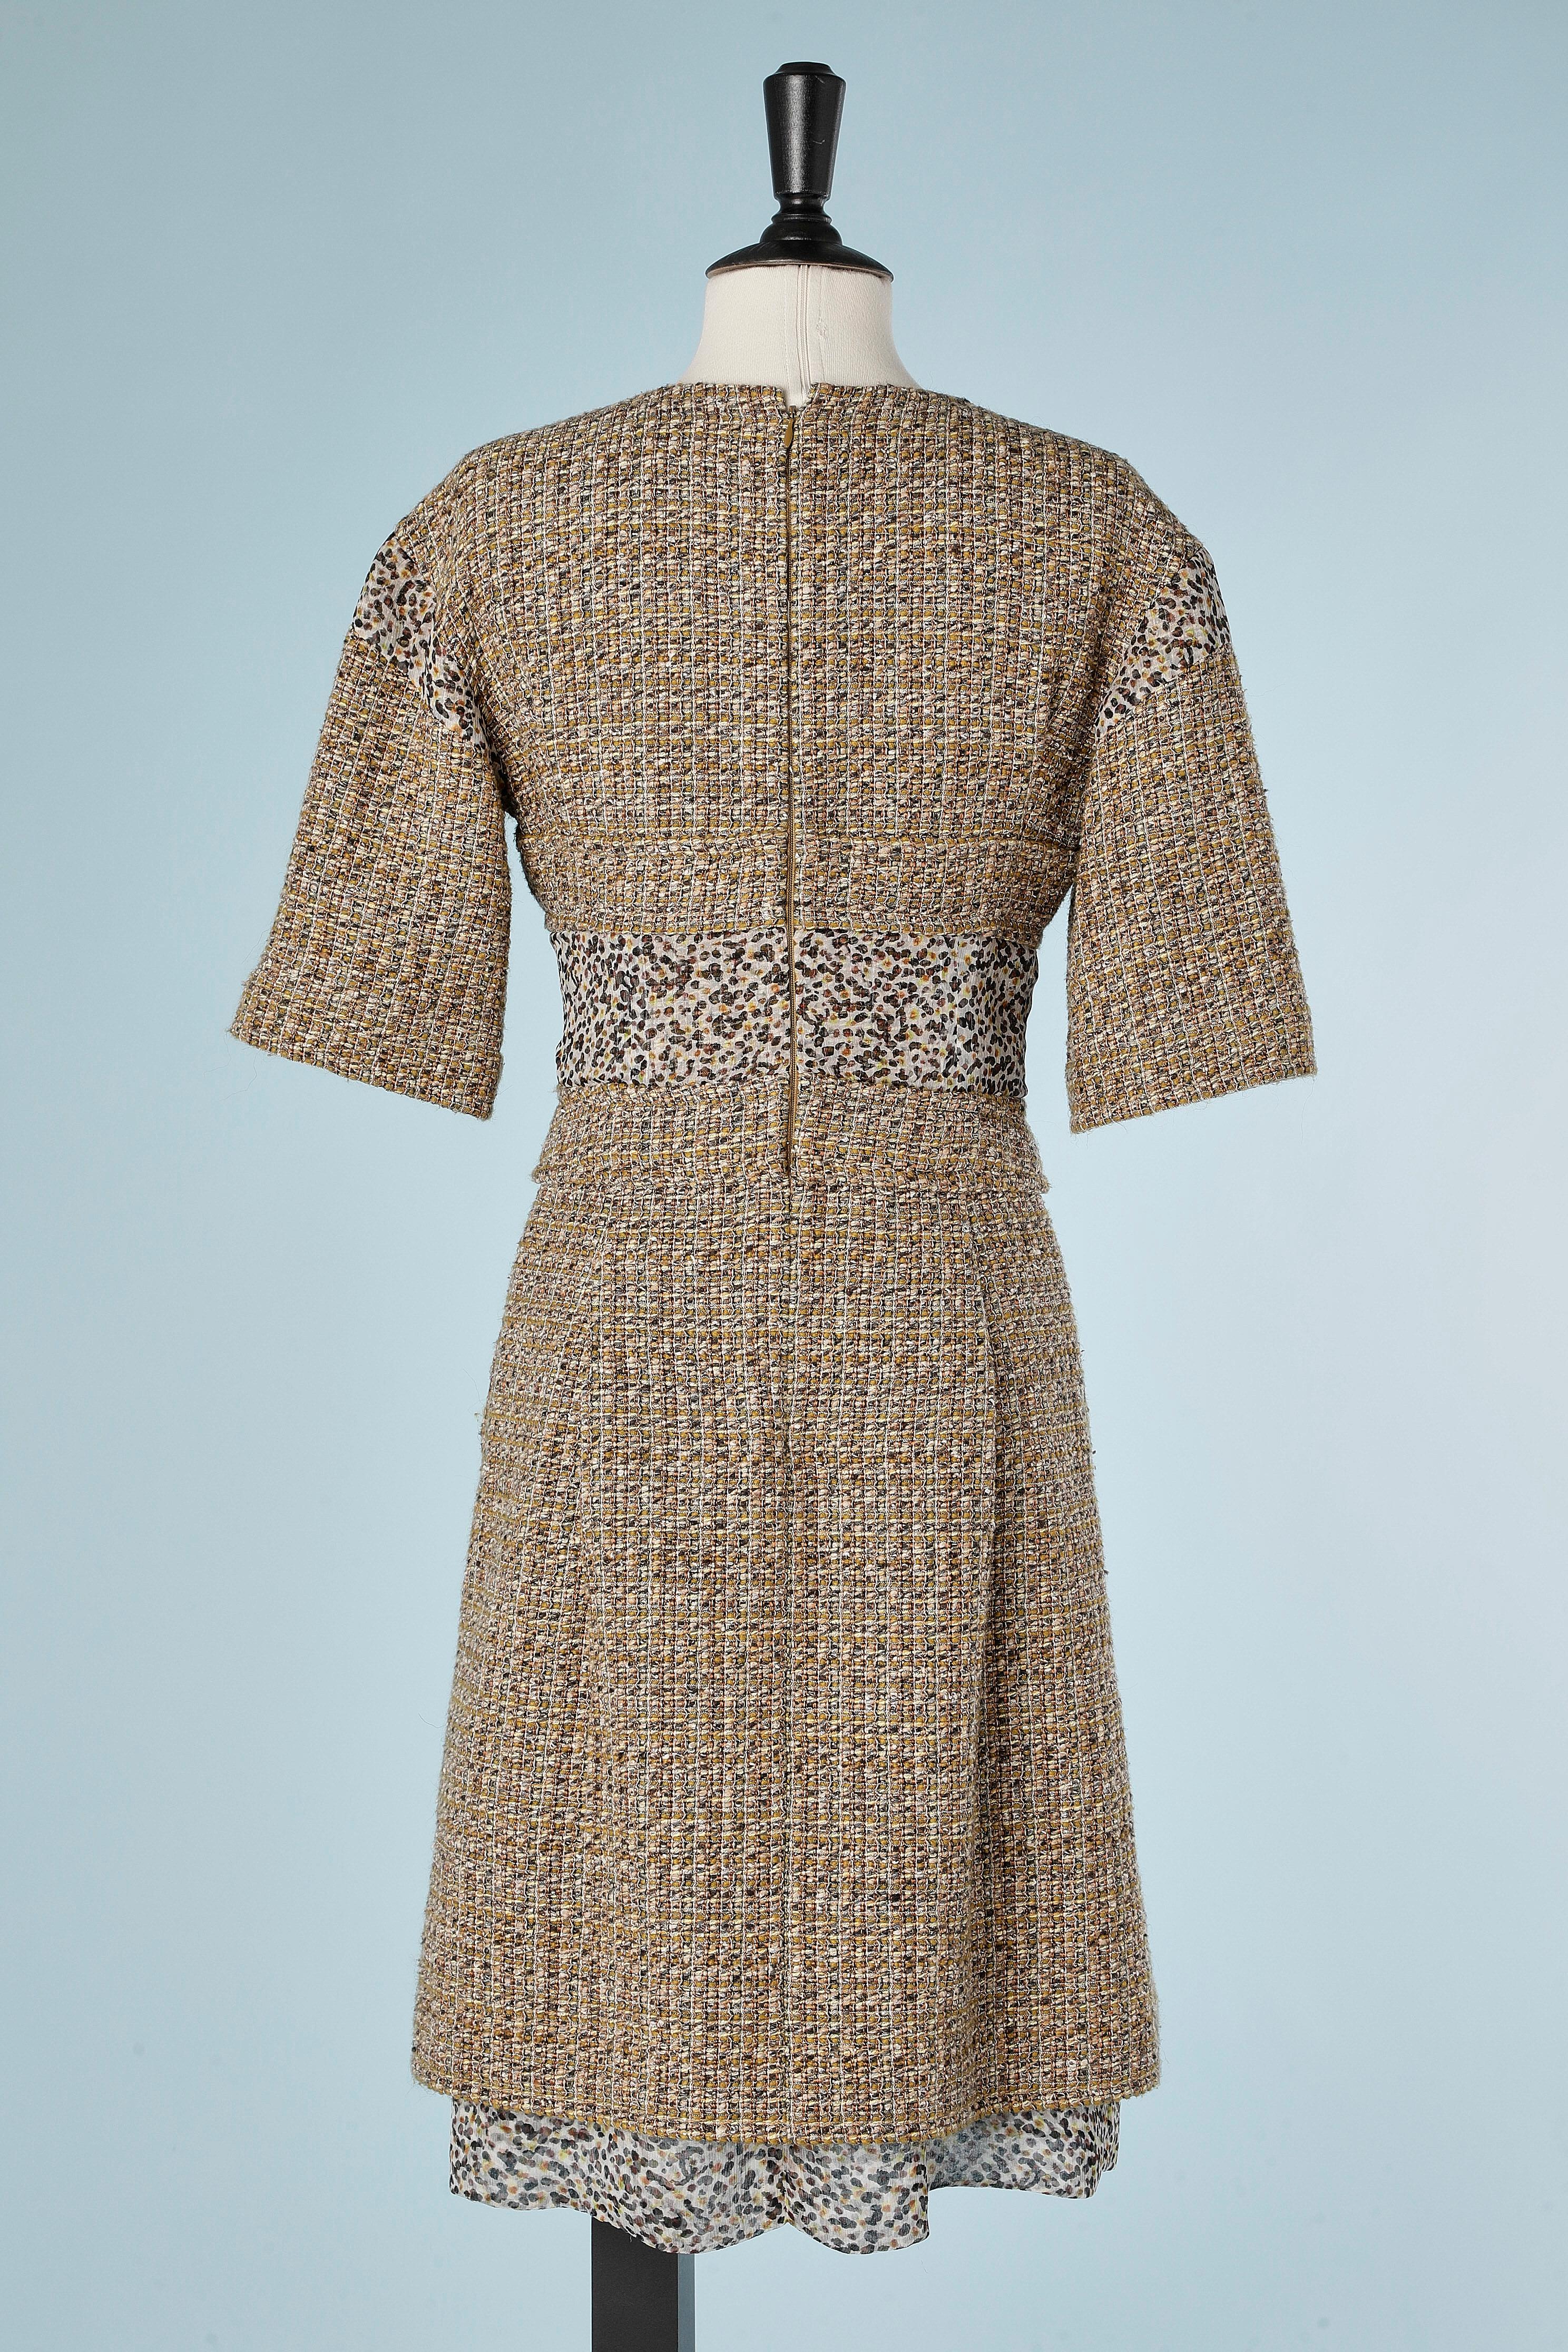 Tweed and printed chiffon cocktail dress Chanel  For Sale 2